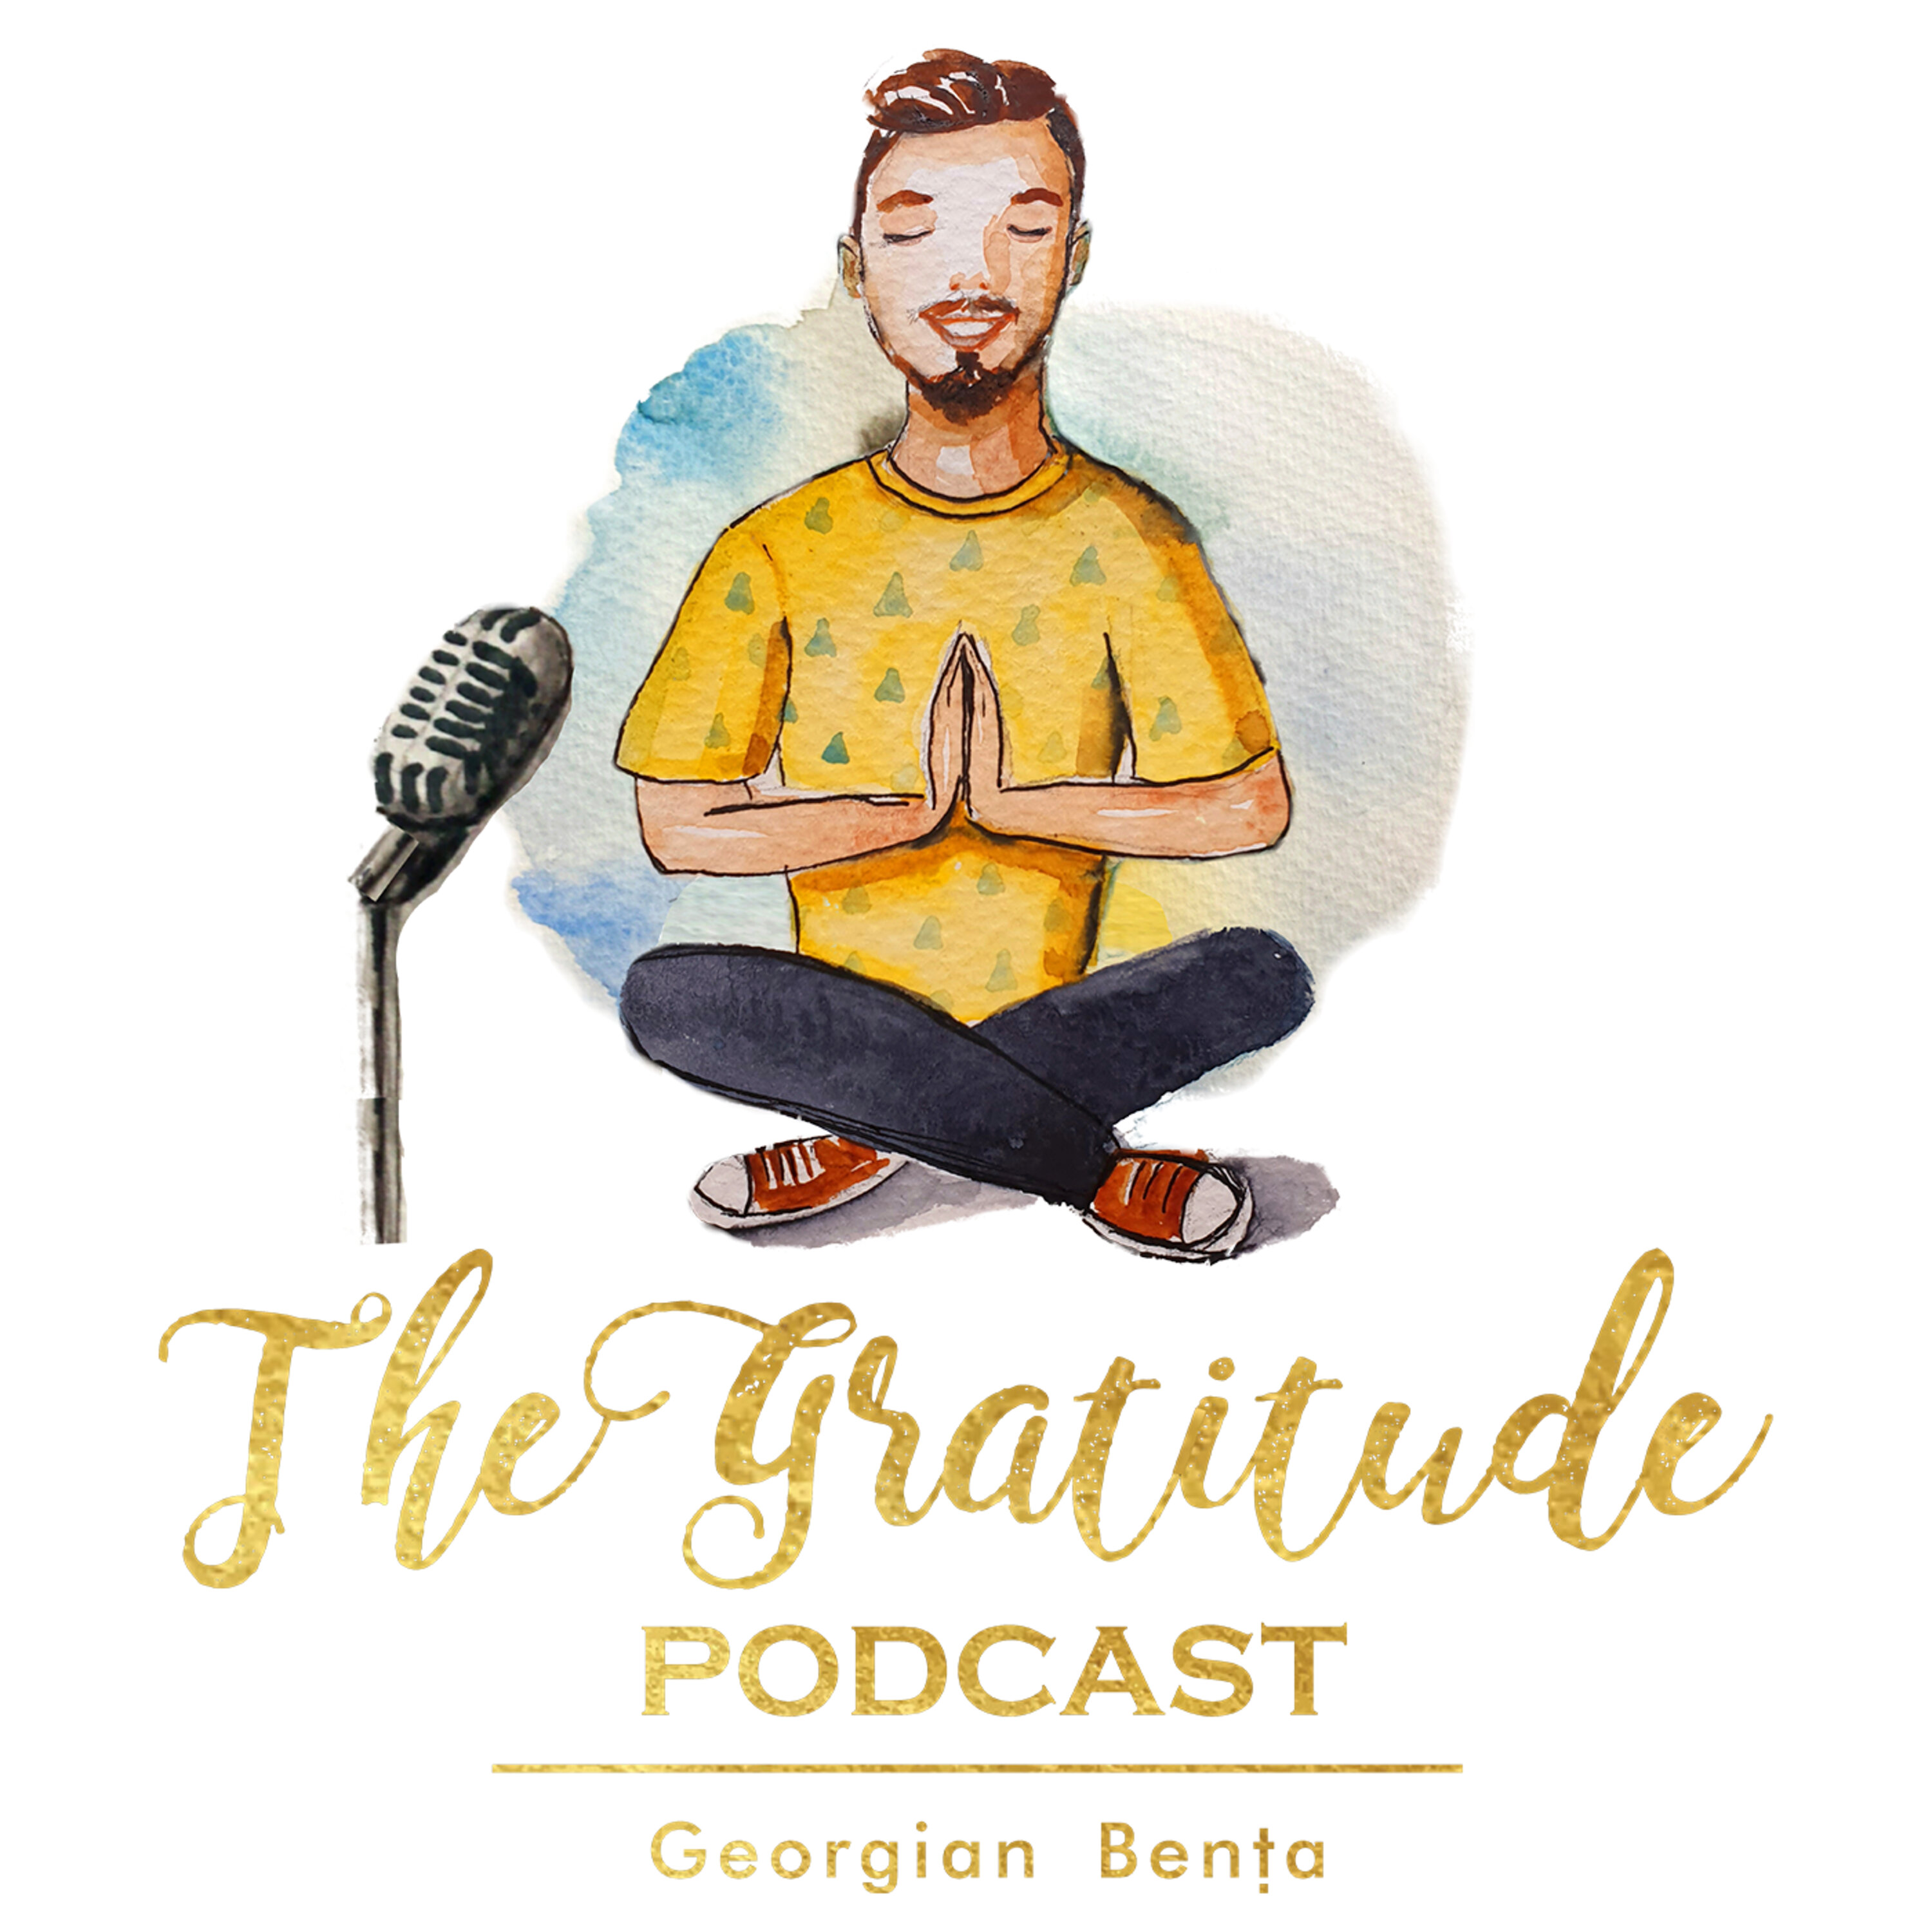 The Magic Of Love & Gratitude - Guy Finely (ep. 679)